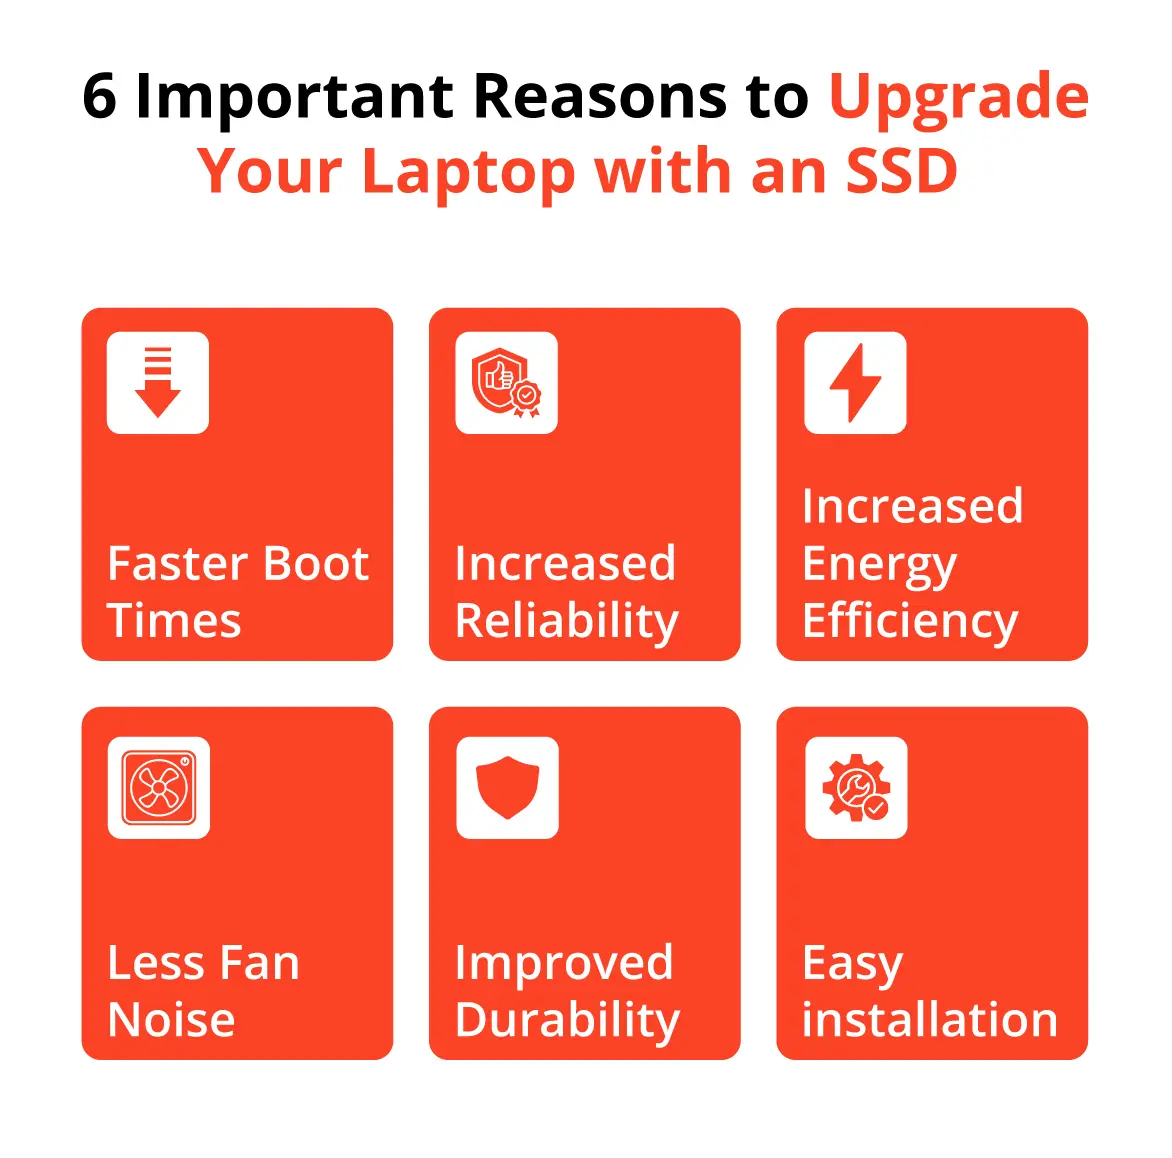 6 Important Reasons to Upgrade Your Laptop with an SSD